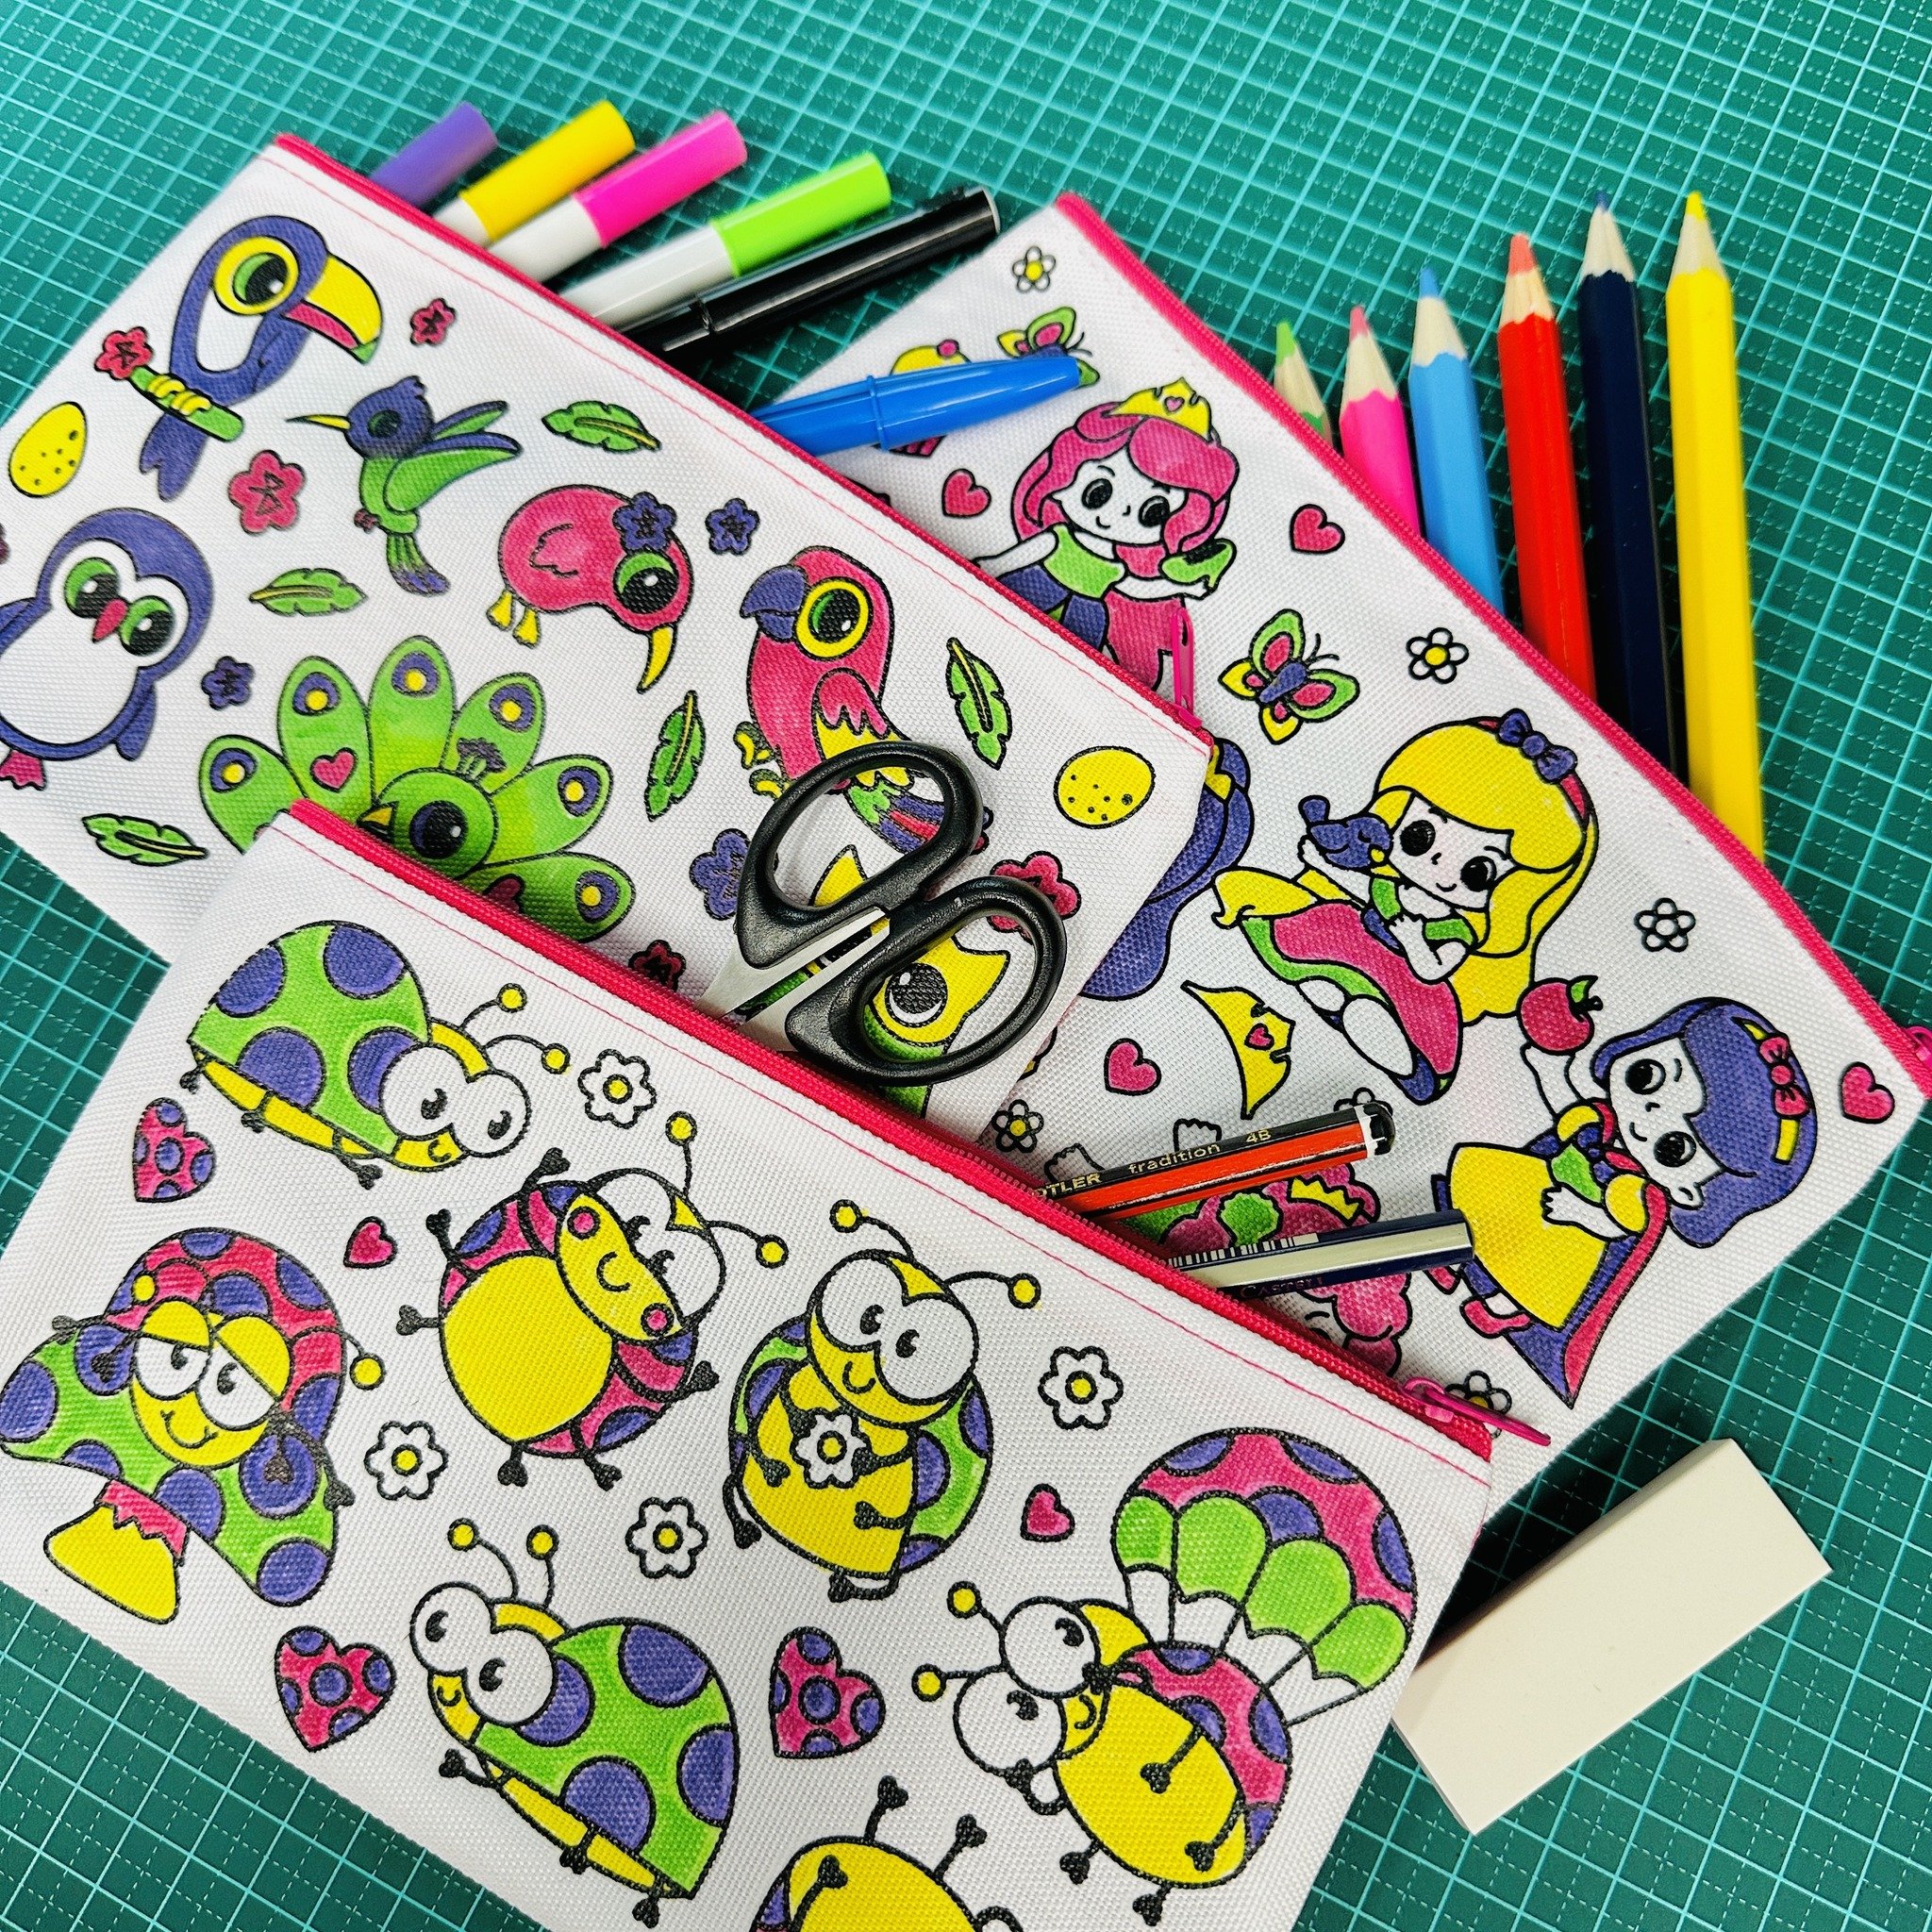 Our easy craft&reg; colour-in pencil cases are not only cool for school, they make a great gift or activity. The textile markers are washable too meaning they will not run or fade. 6 to choose from. Designed in Australia. We create, you make😊

#easy